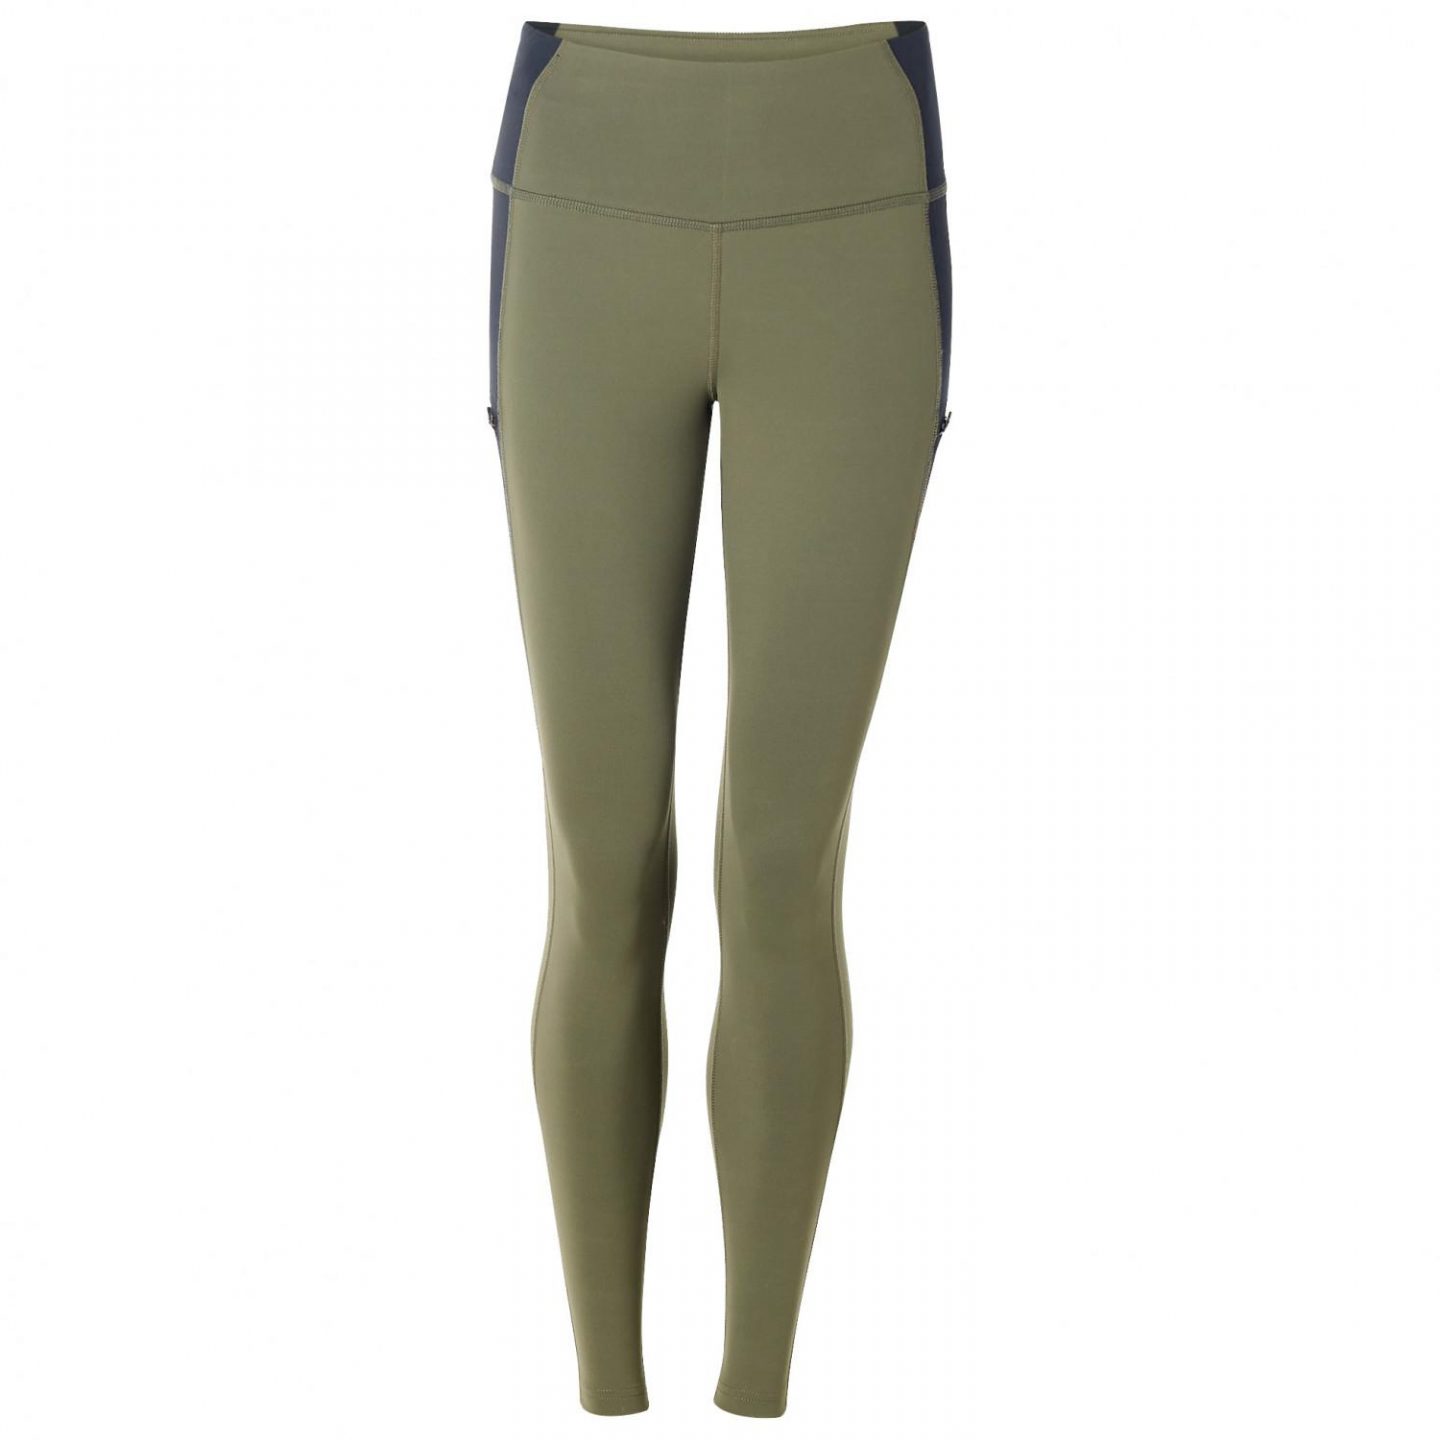 My Workout Wear Starts With The Best Hiking Leggings - The Mom Edit